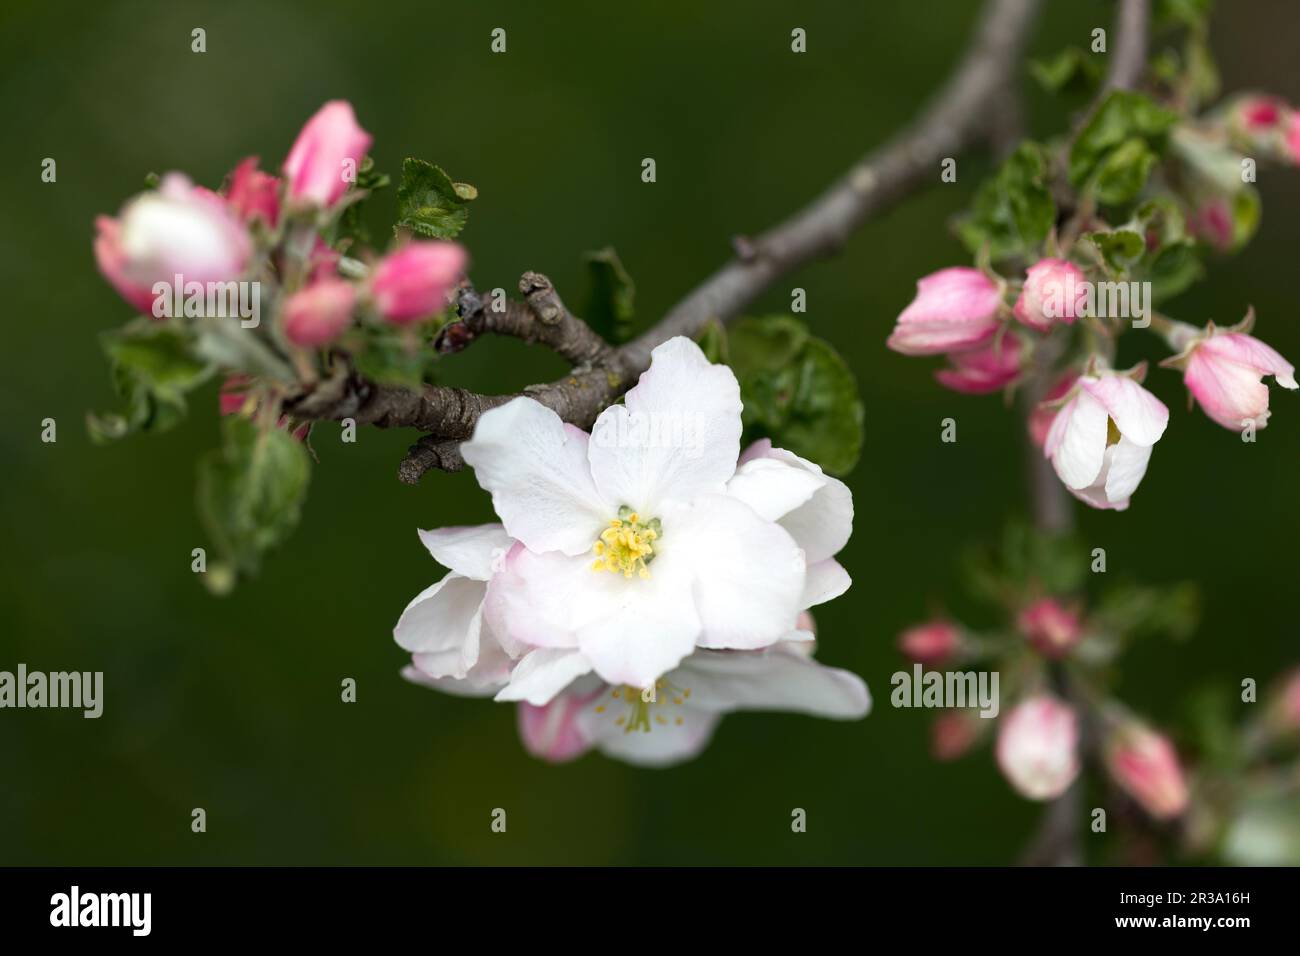 Apple blossoms, close up with shallow depth of field Stock Photo